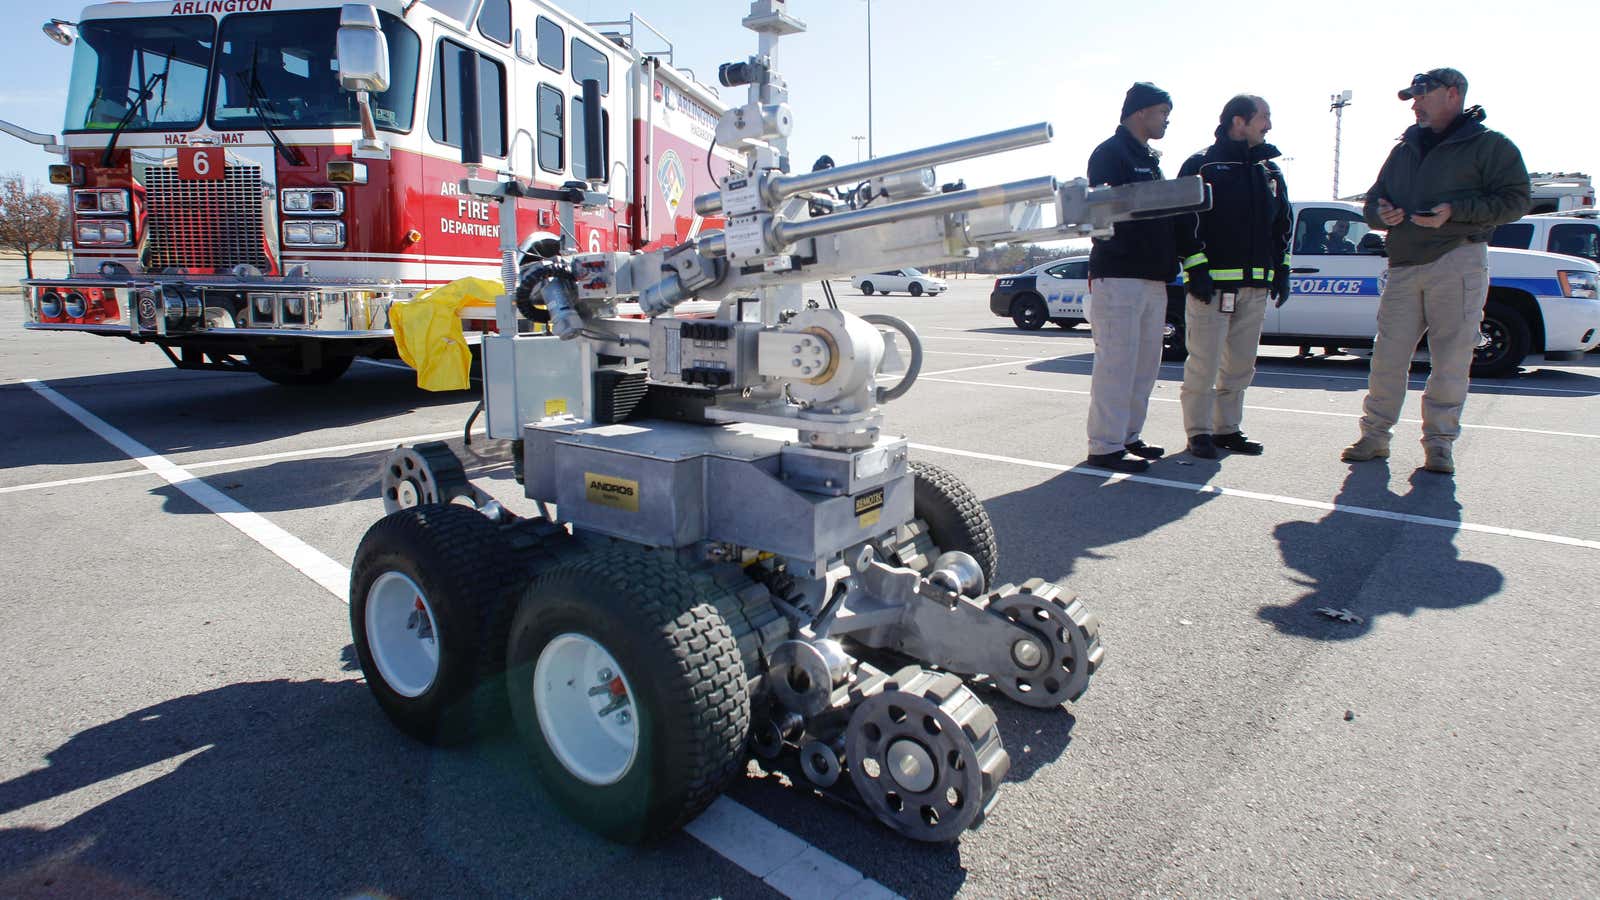 A typical bomb robot, this one used in 2011 in nearby Arlington, Texas during the Super Bowl.